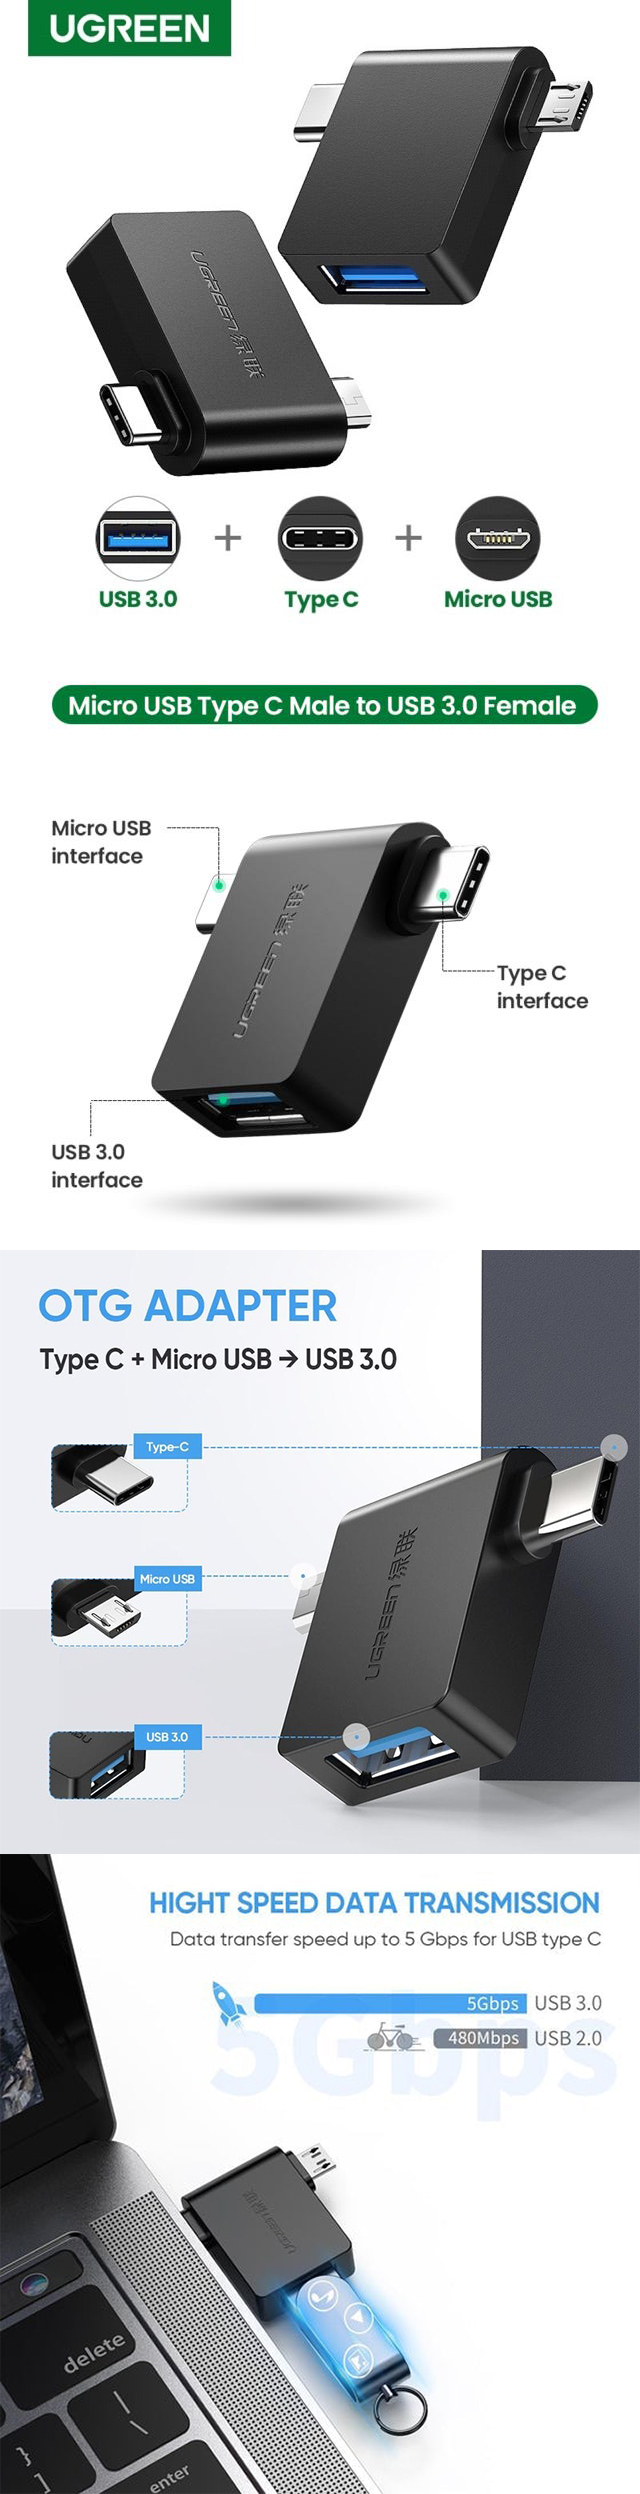 USB-Cables-UGreen-2-in-1-Micro-USB-Male-USB-C-to-USB-3-0-Female-OTG-Adapter-2